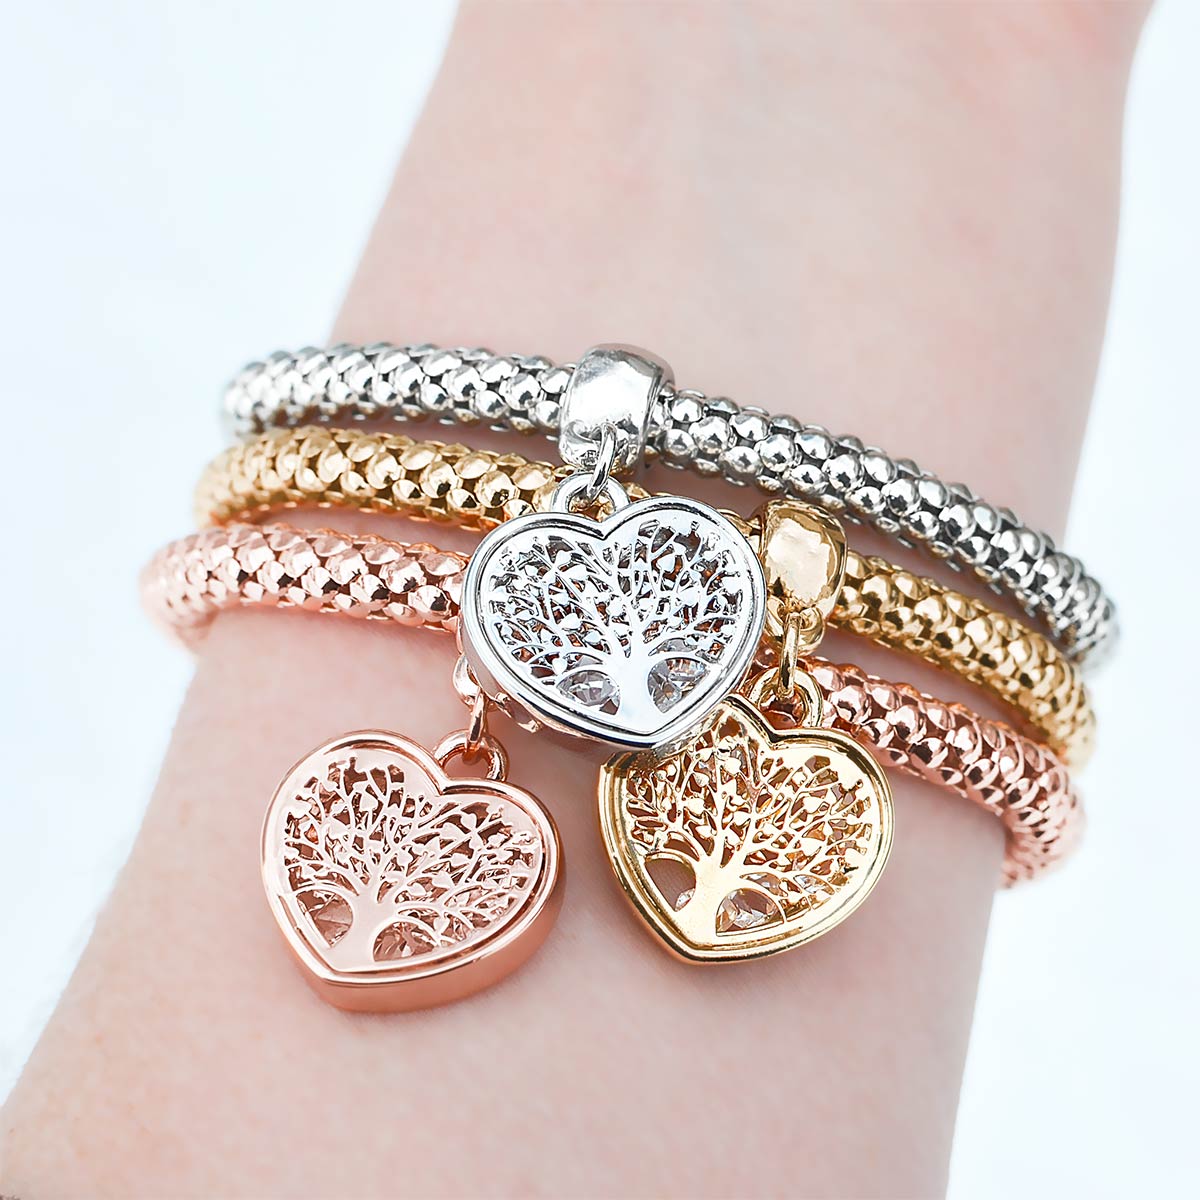 Buy 1, Get 3 FREE To My Daughter, Strong Roots - Tree of Life Rose Gold Mini Heart Necklace & Bracelet Gift Set